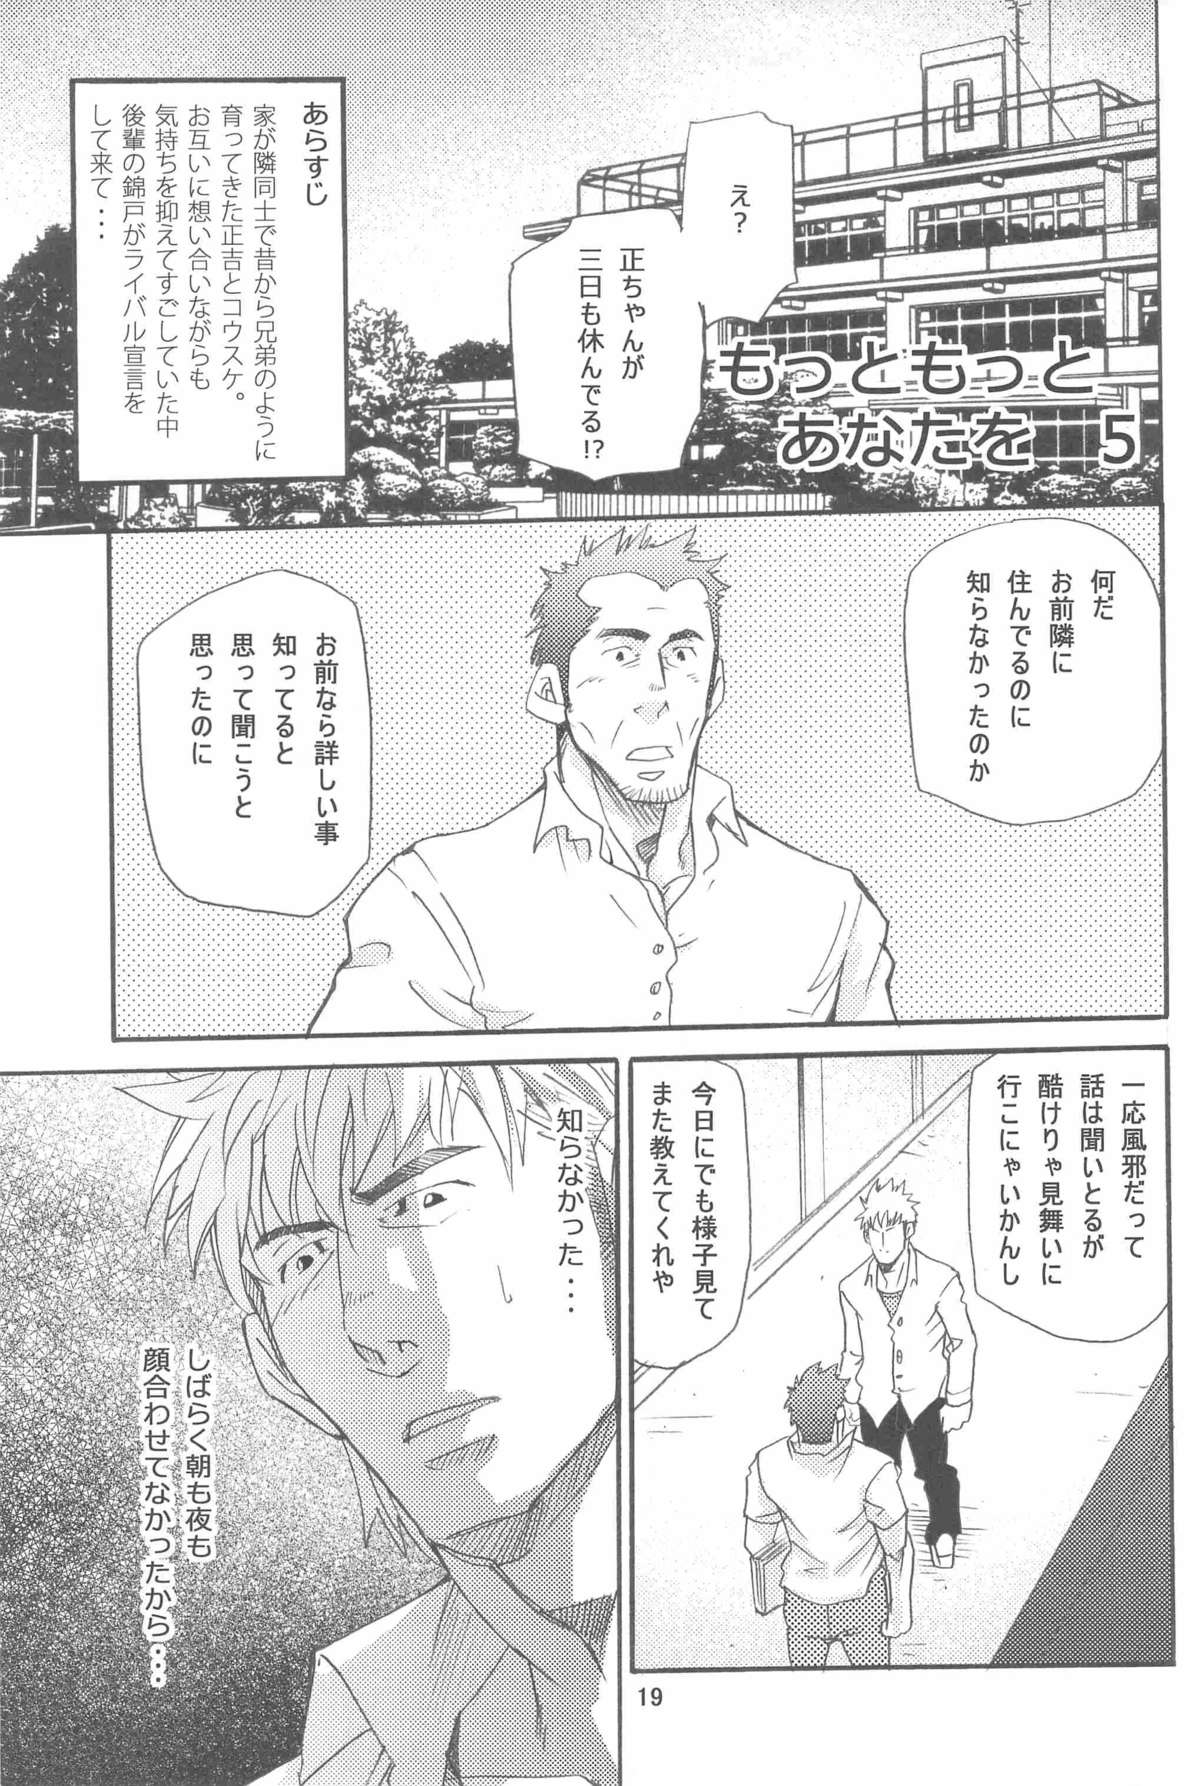 [MATSU Takeshi] More and More of You 5 page 1 full